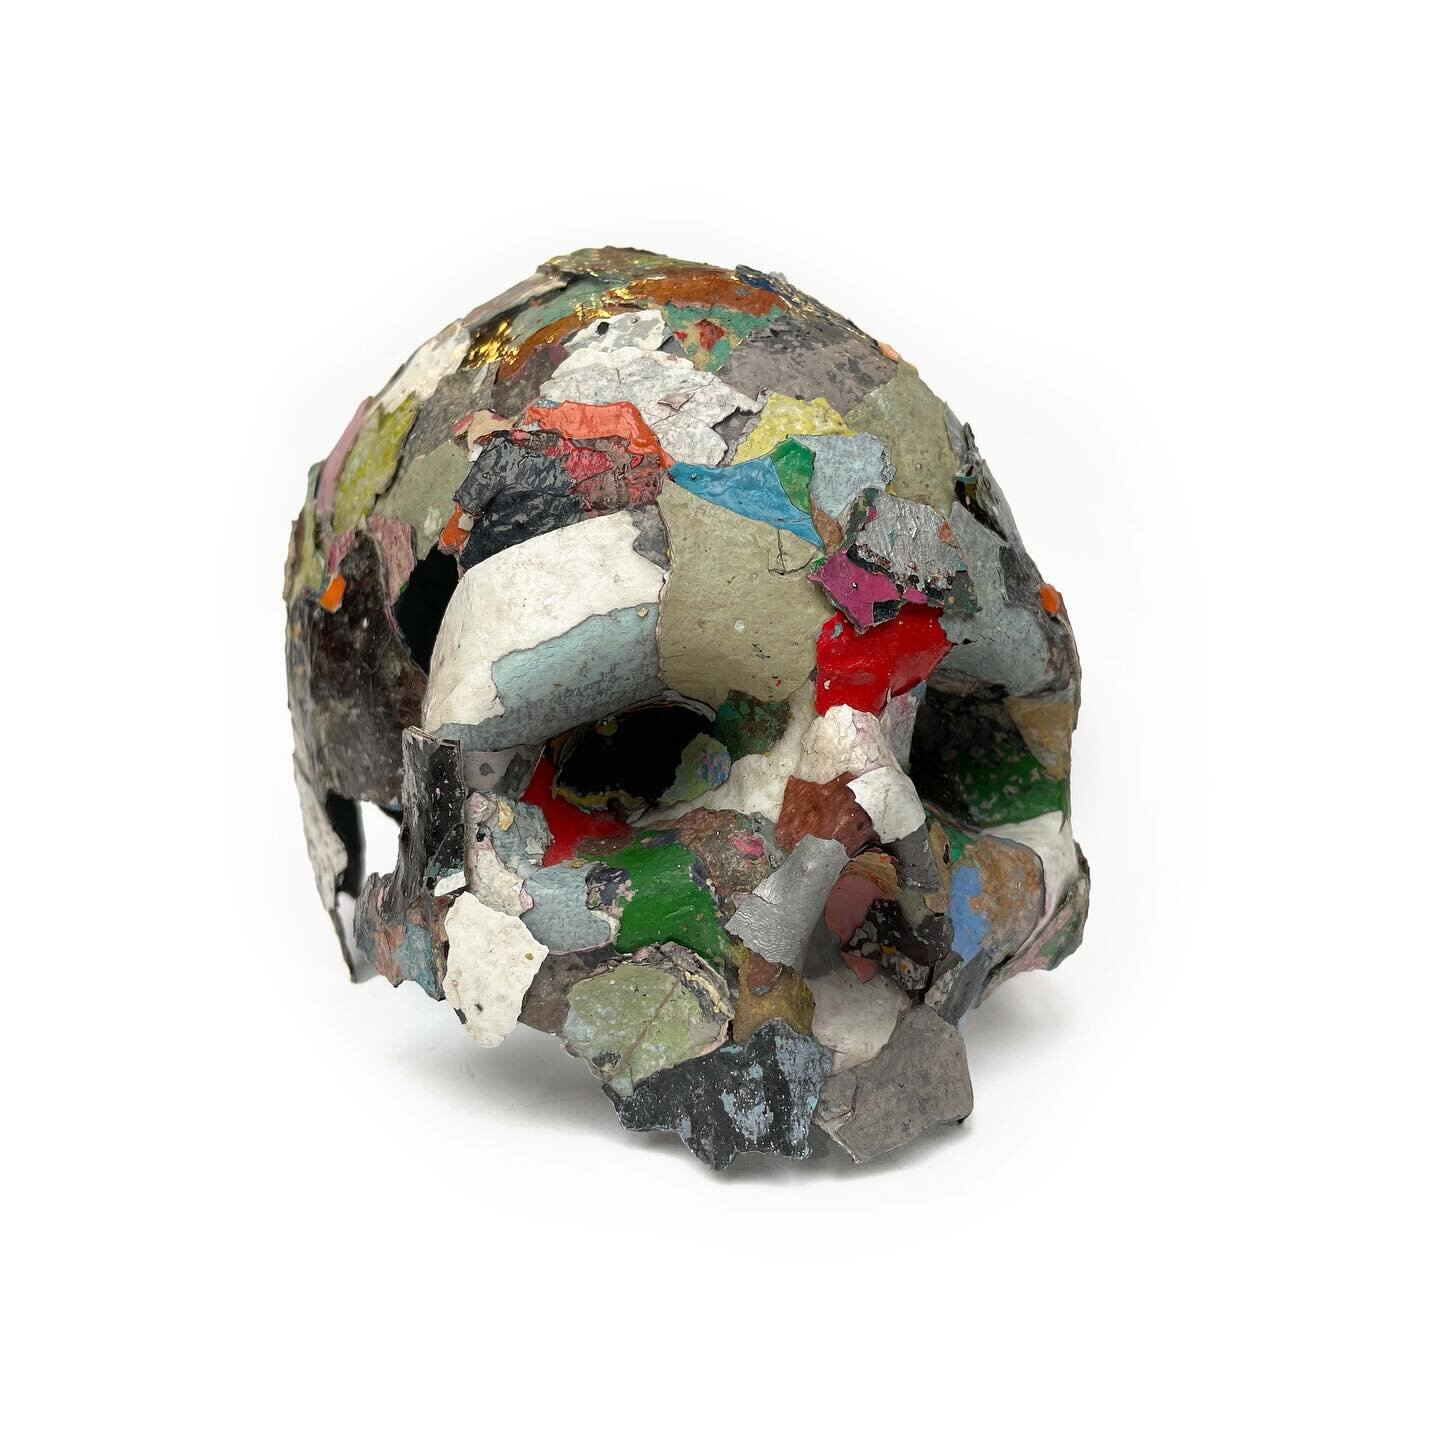 My first skull was made for my solo show @bsmtspace in London. Titled fractured skull I. First in a series made from graffiti paint layers sourced in the streets. The paint for this one comes from the wall of fame in Arnhem the Netherlands. Thick lay